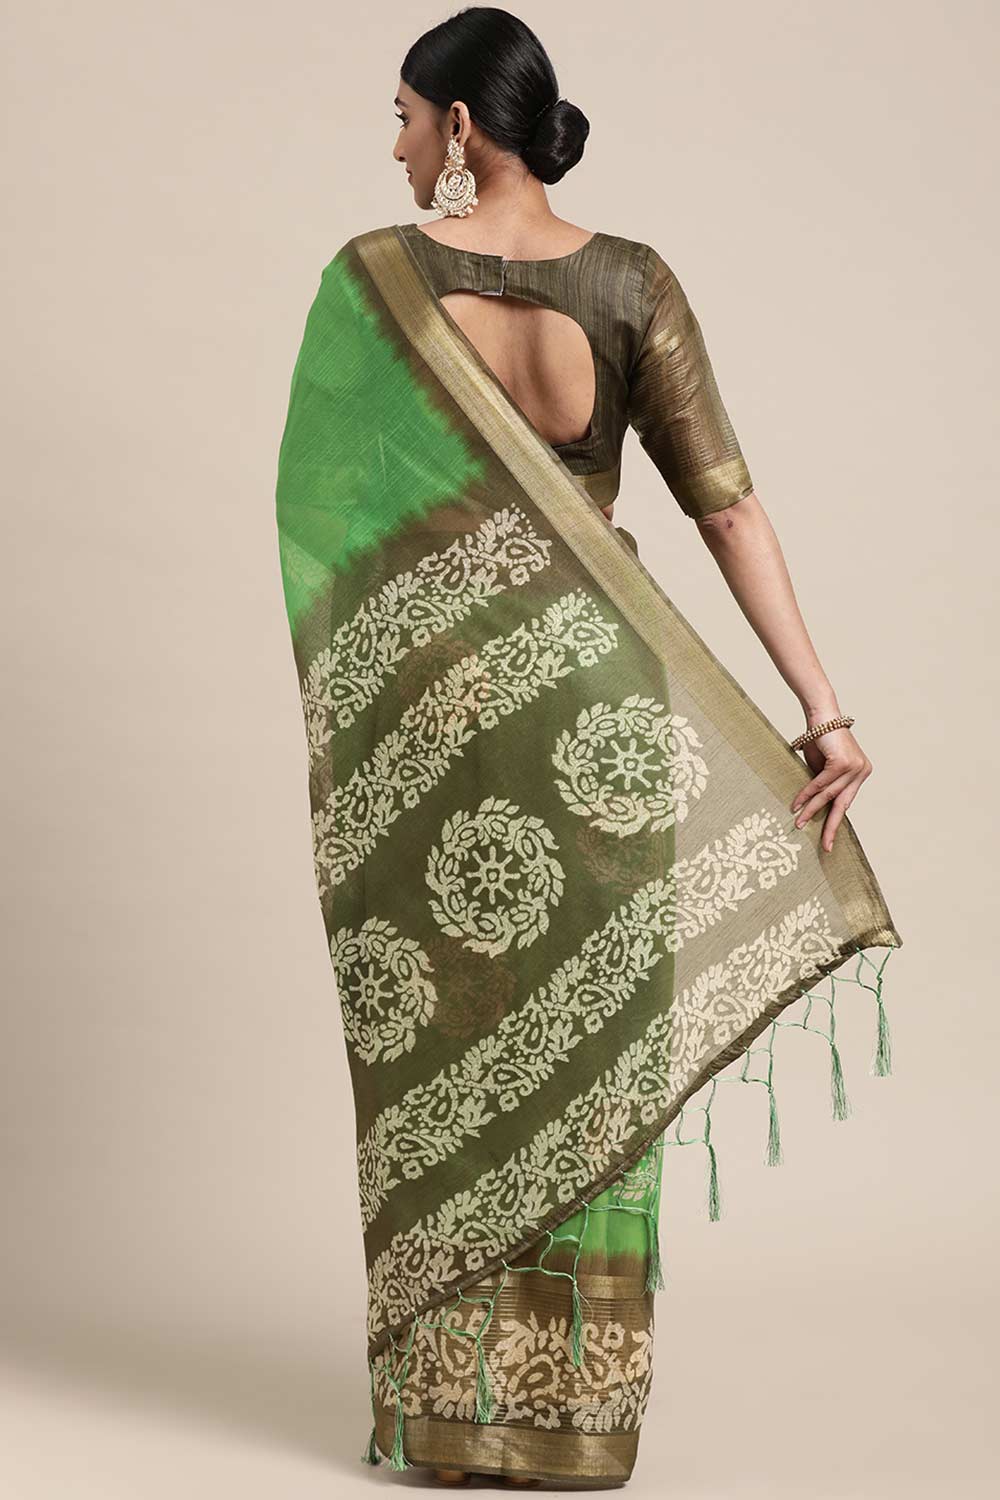 Shop Elise Green Linen Blend Floral Print Taant One Minute Saree at best offer at our  Store - One Minute Saree